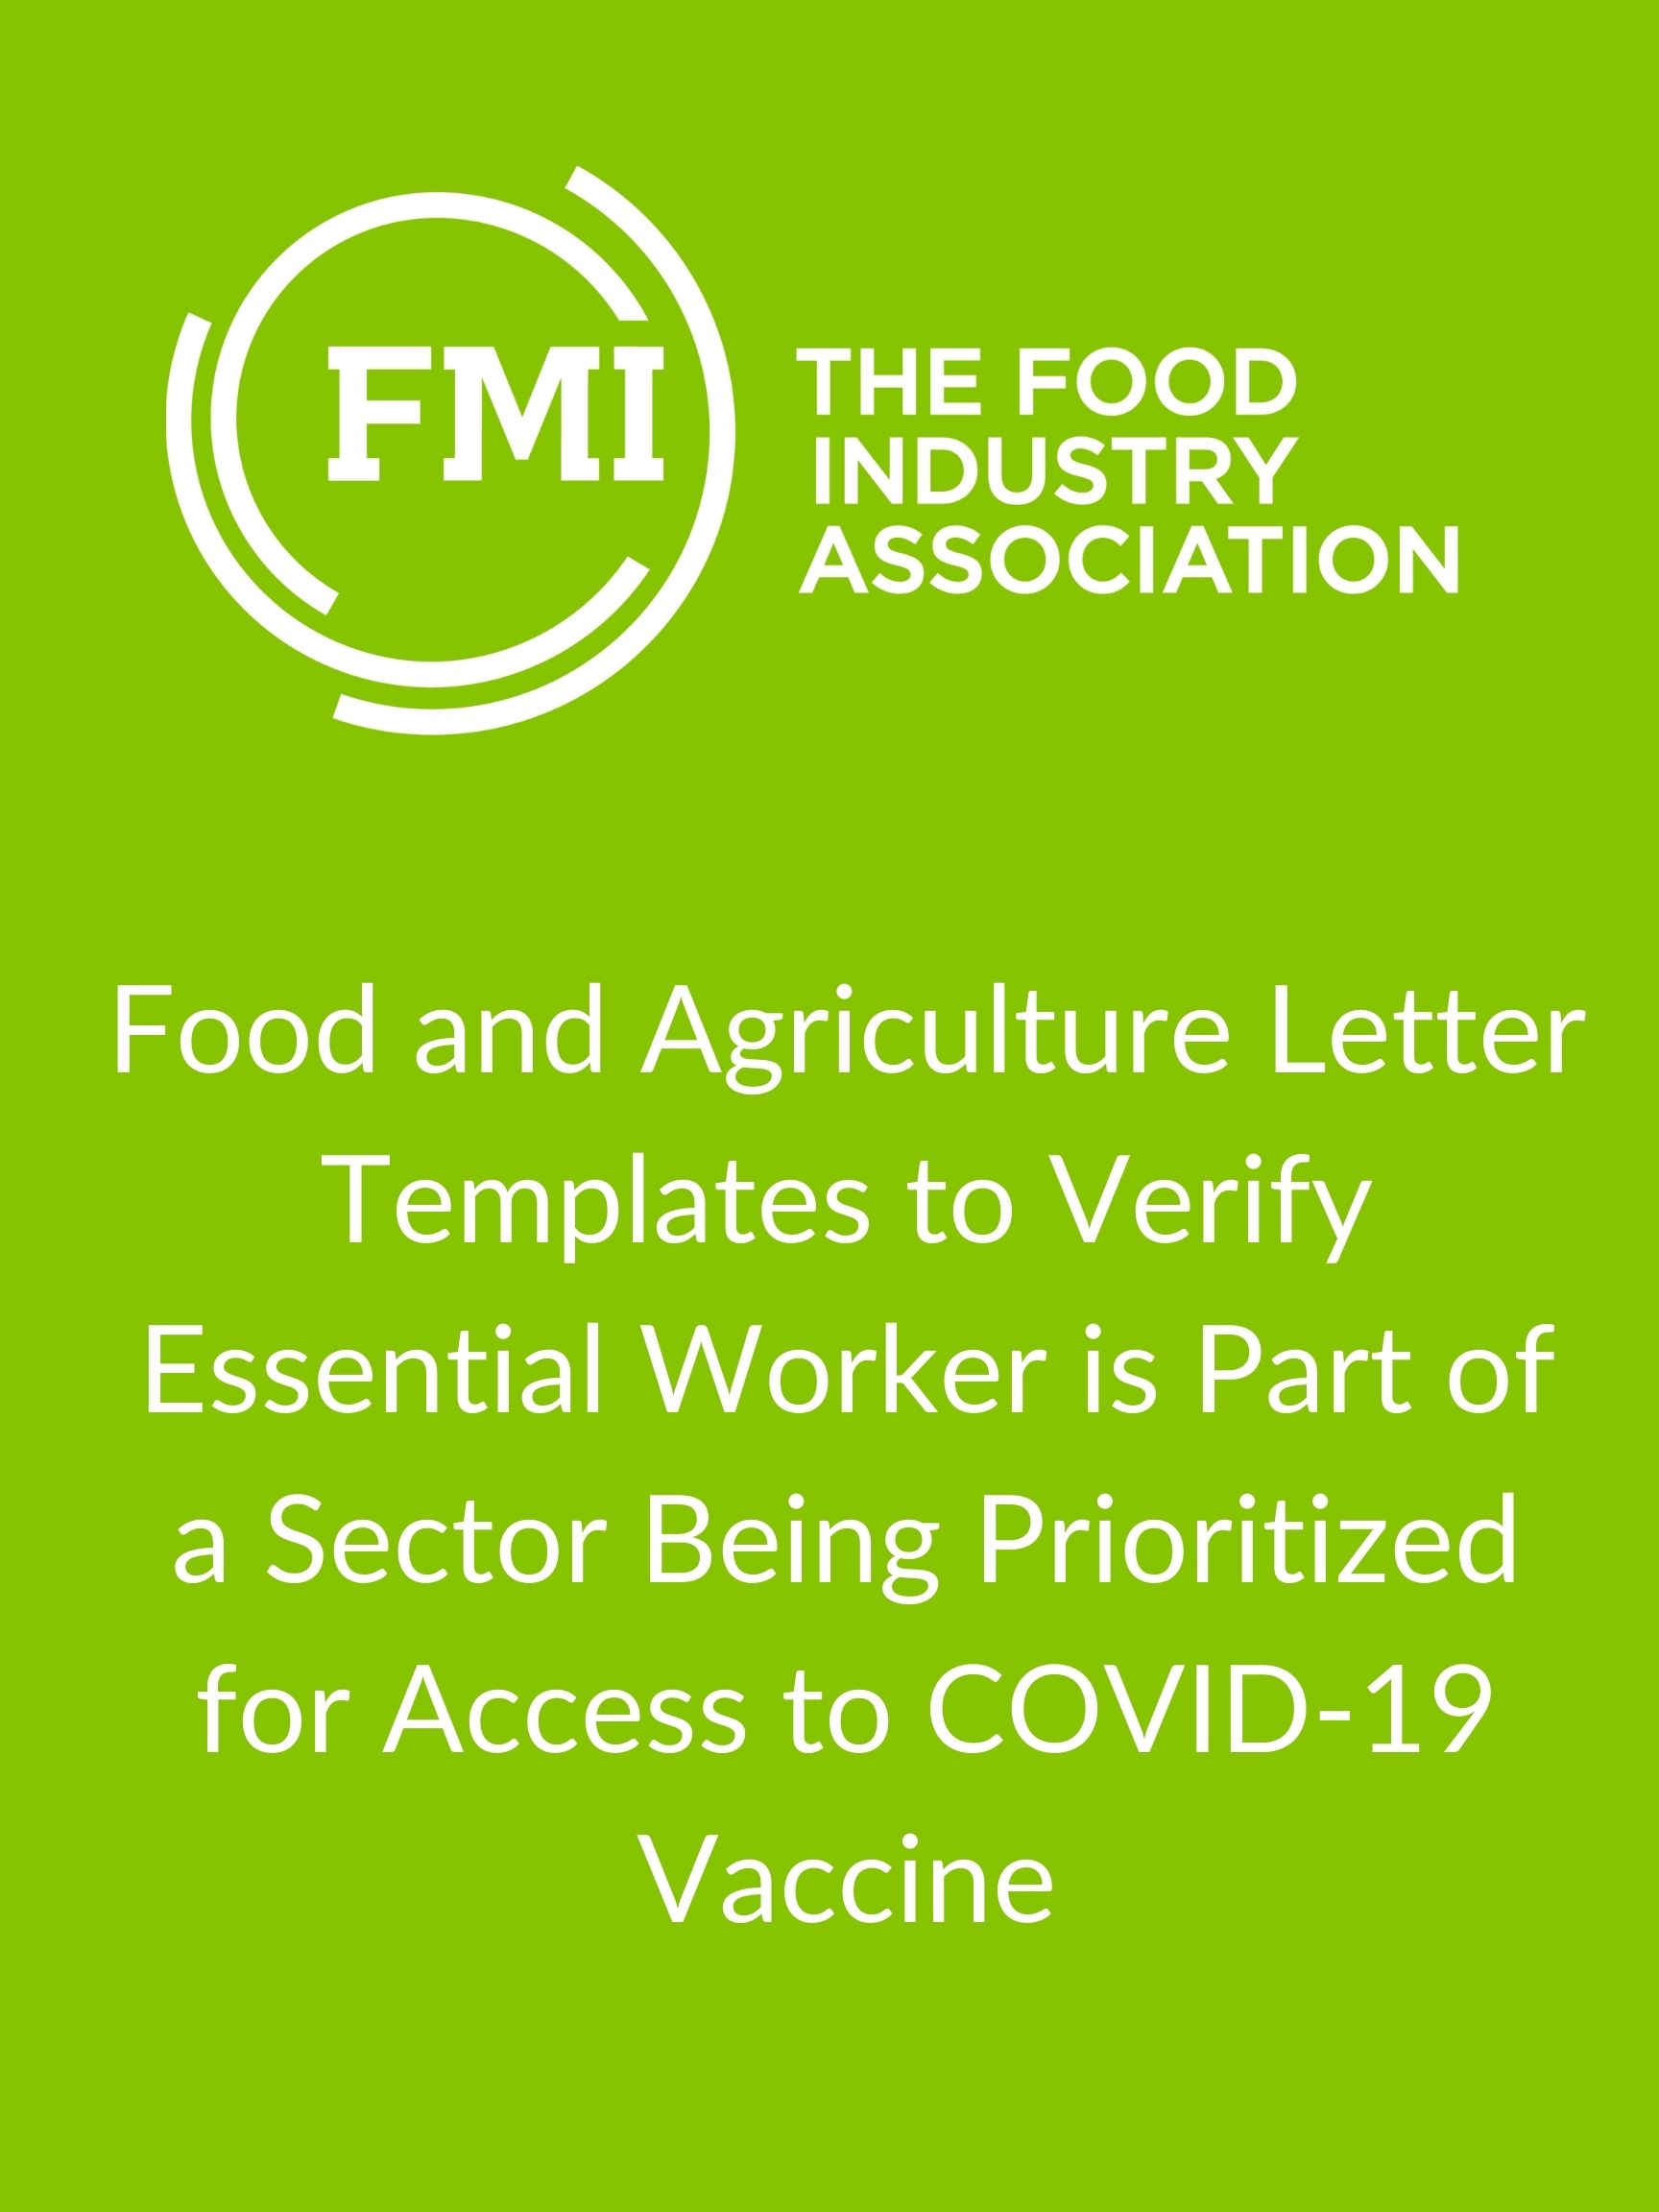 Food and Agriculture Letter Template -- Frontline Essential Worker Entitled to COVID-19 Vaccine Prioritization-8